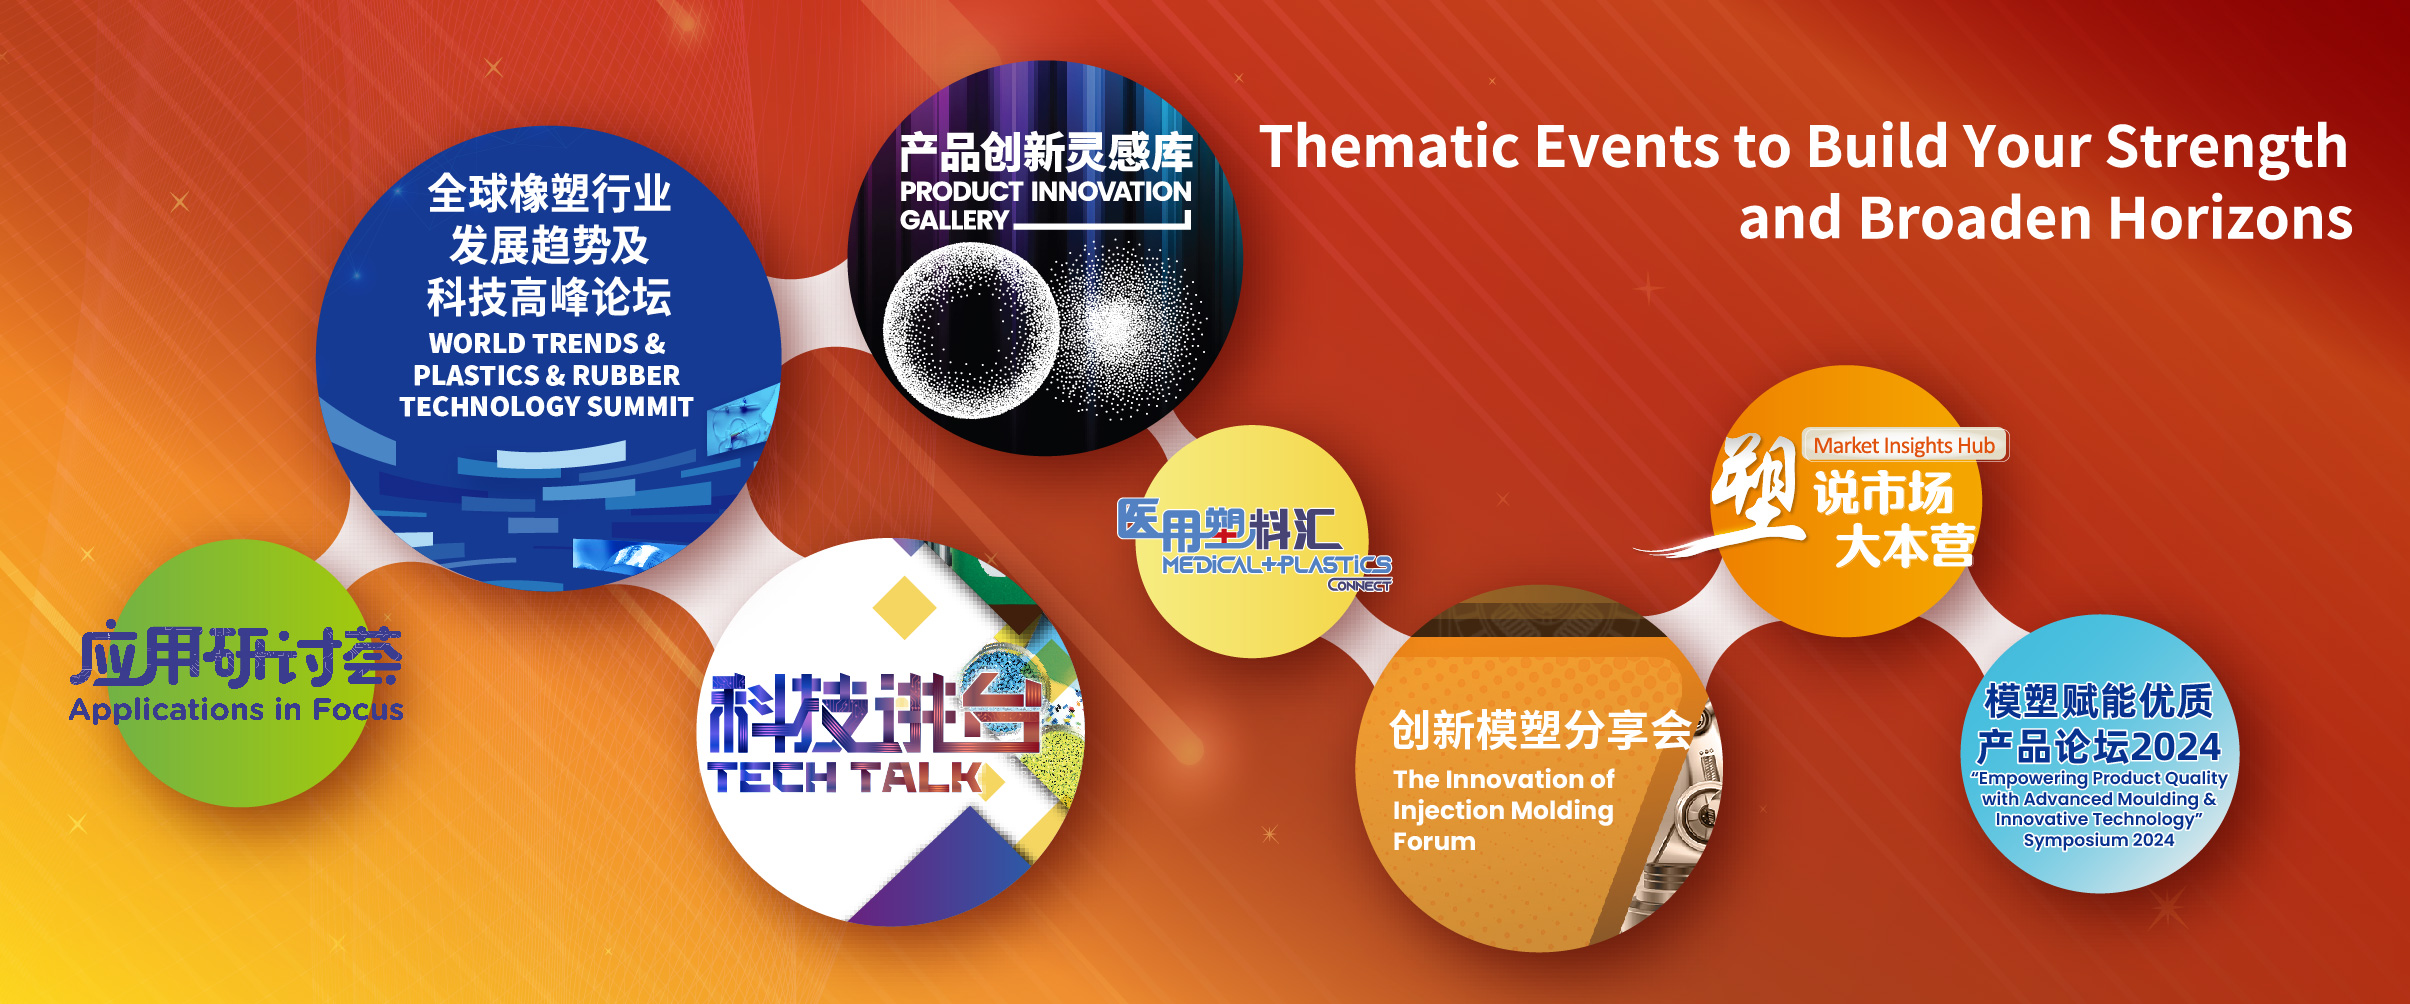 Free to Participate Value Added Thematic Conferences & Forums